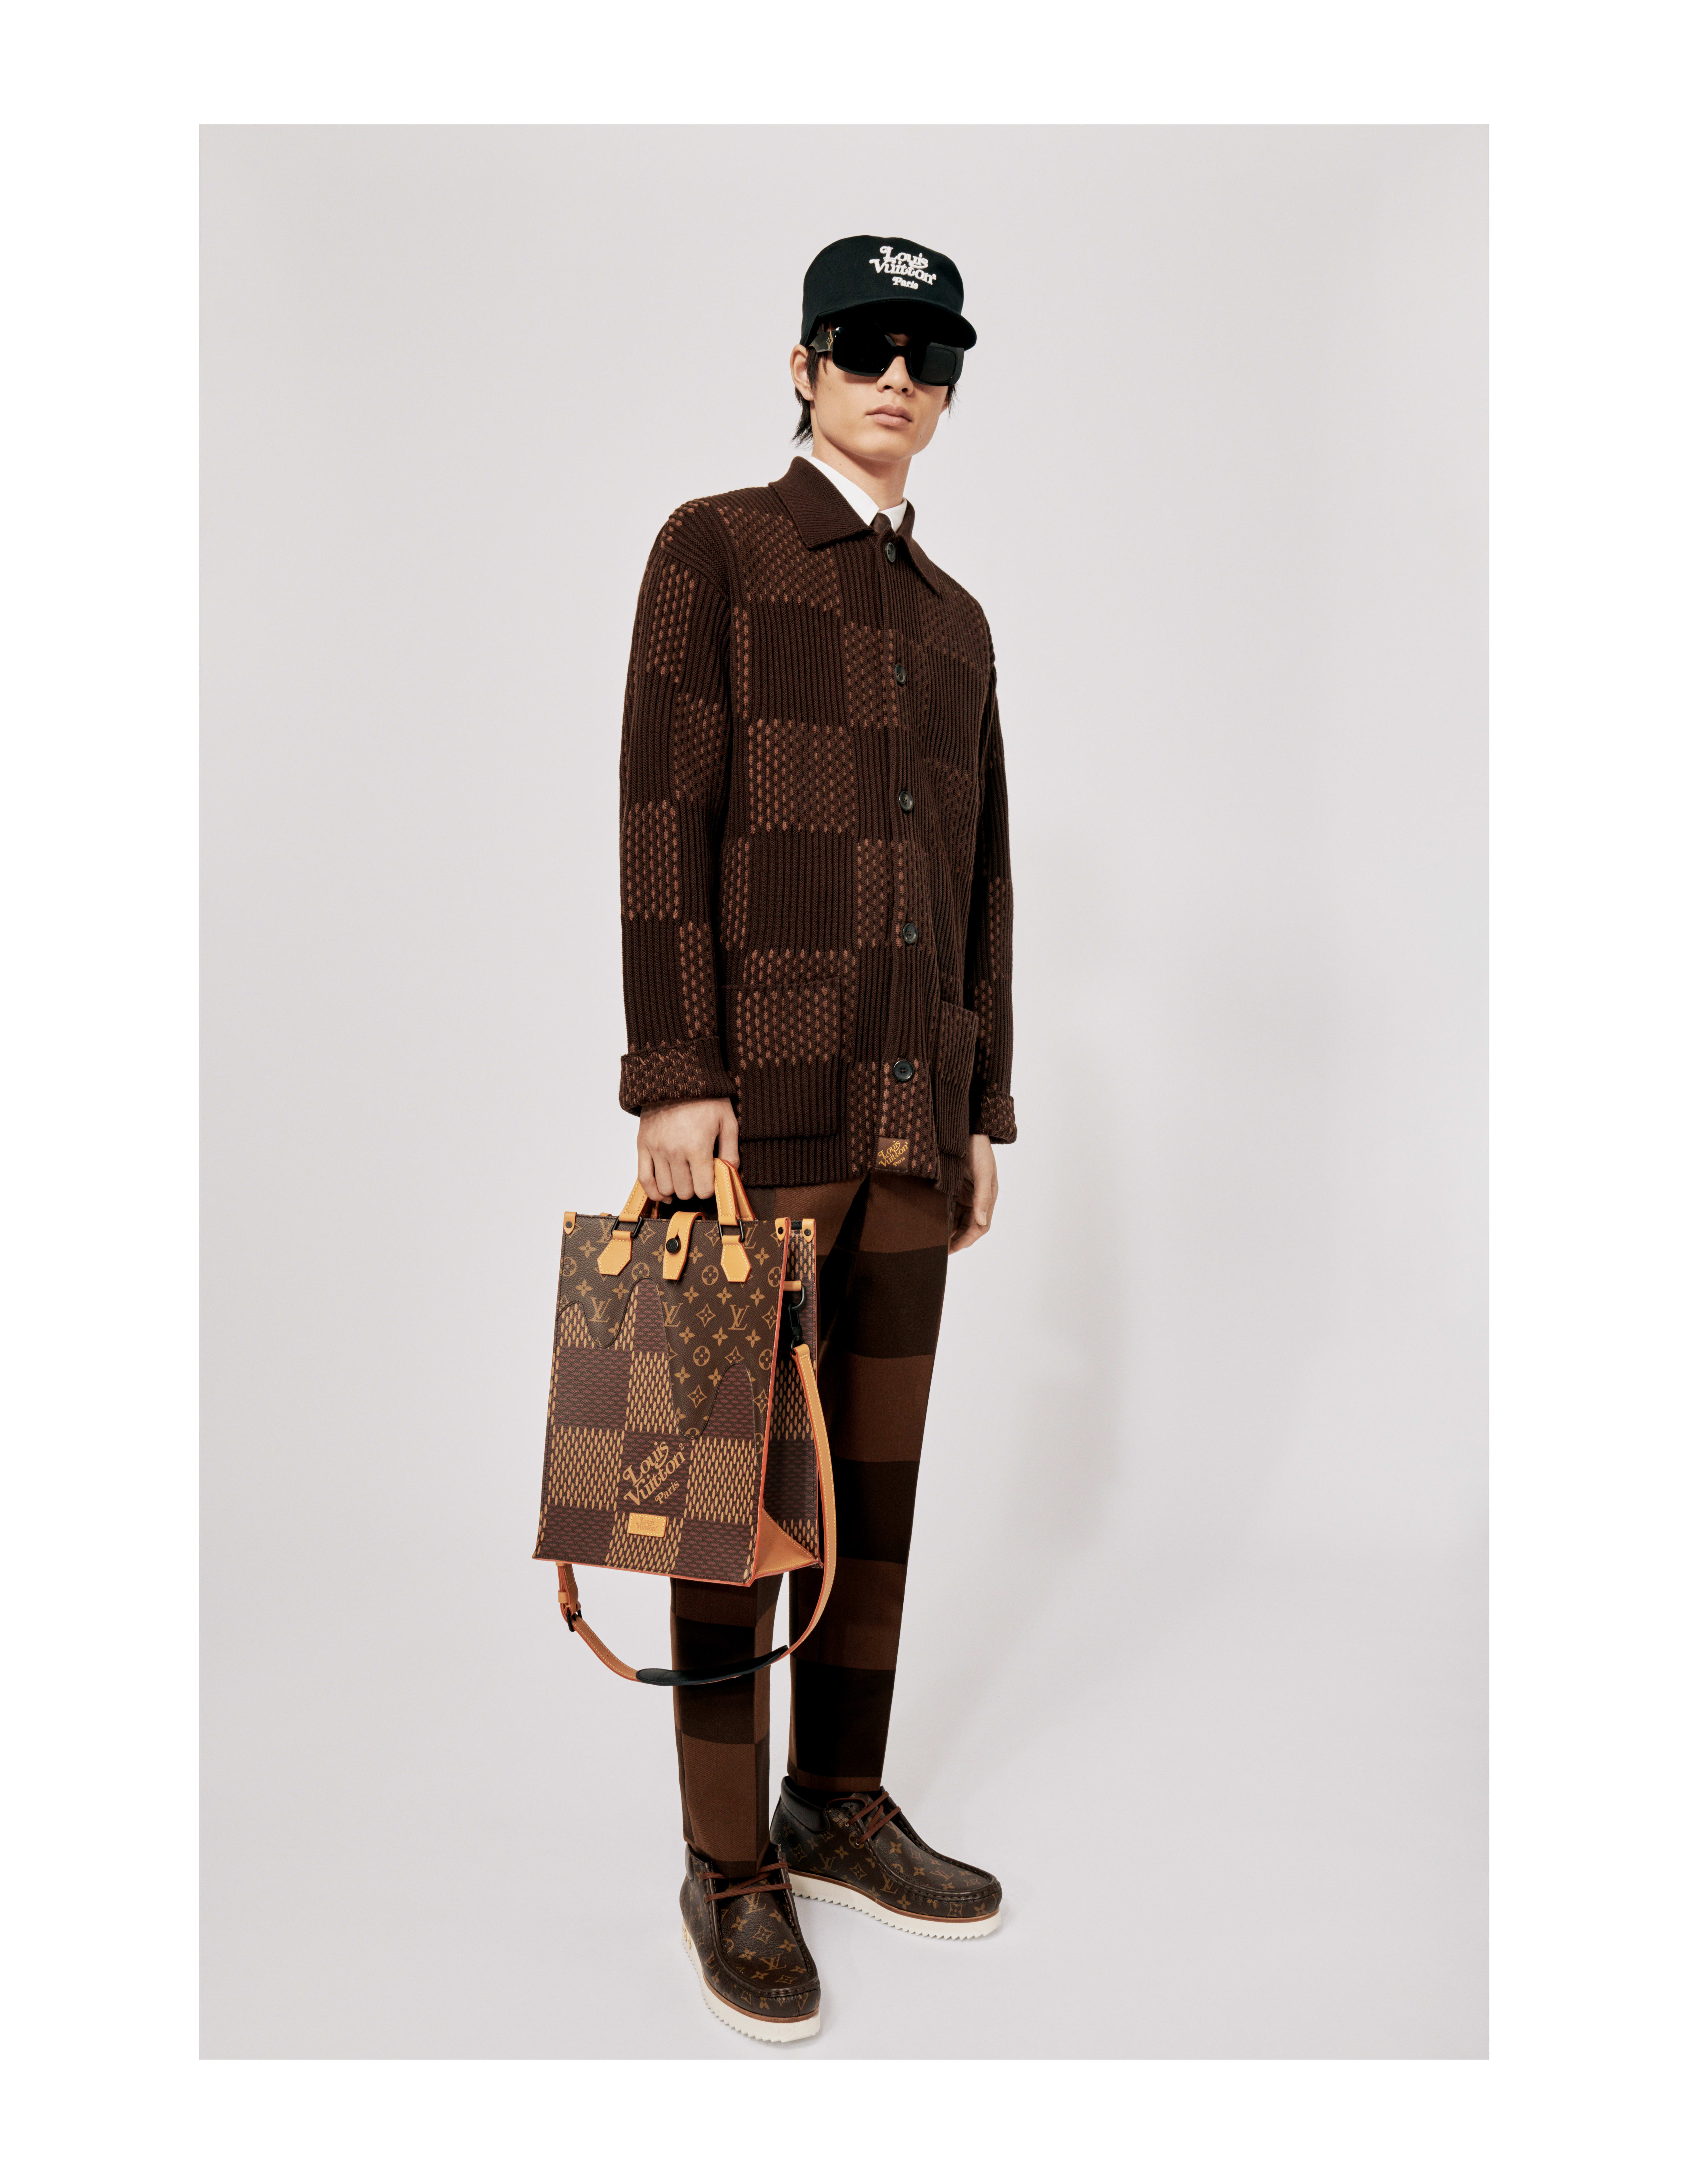 The hottest pieces from the Louis Vuitton x Nigo Pre-Fall 2020 collection